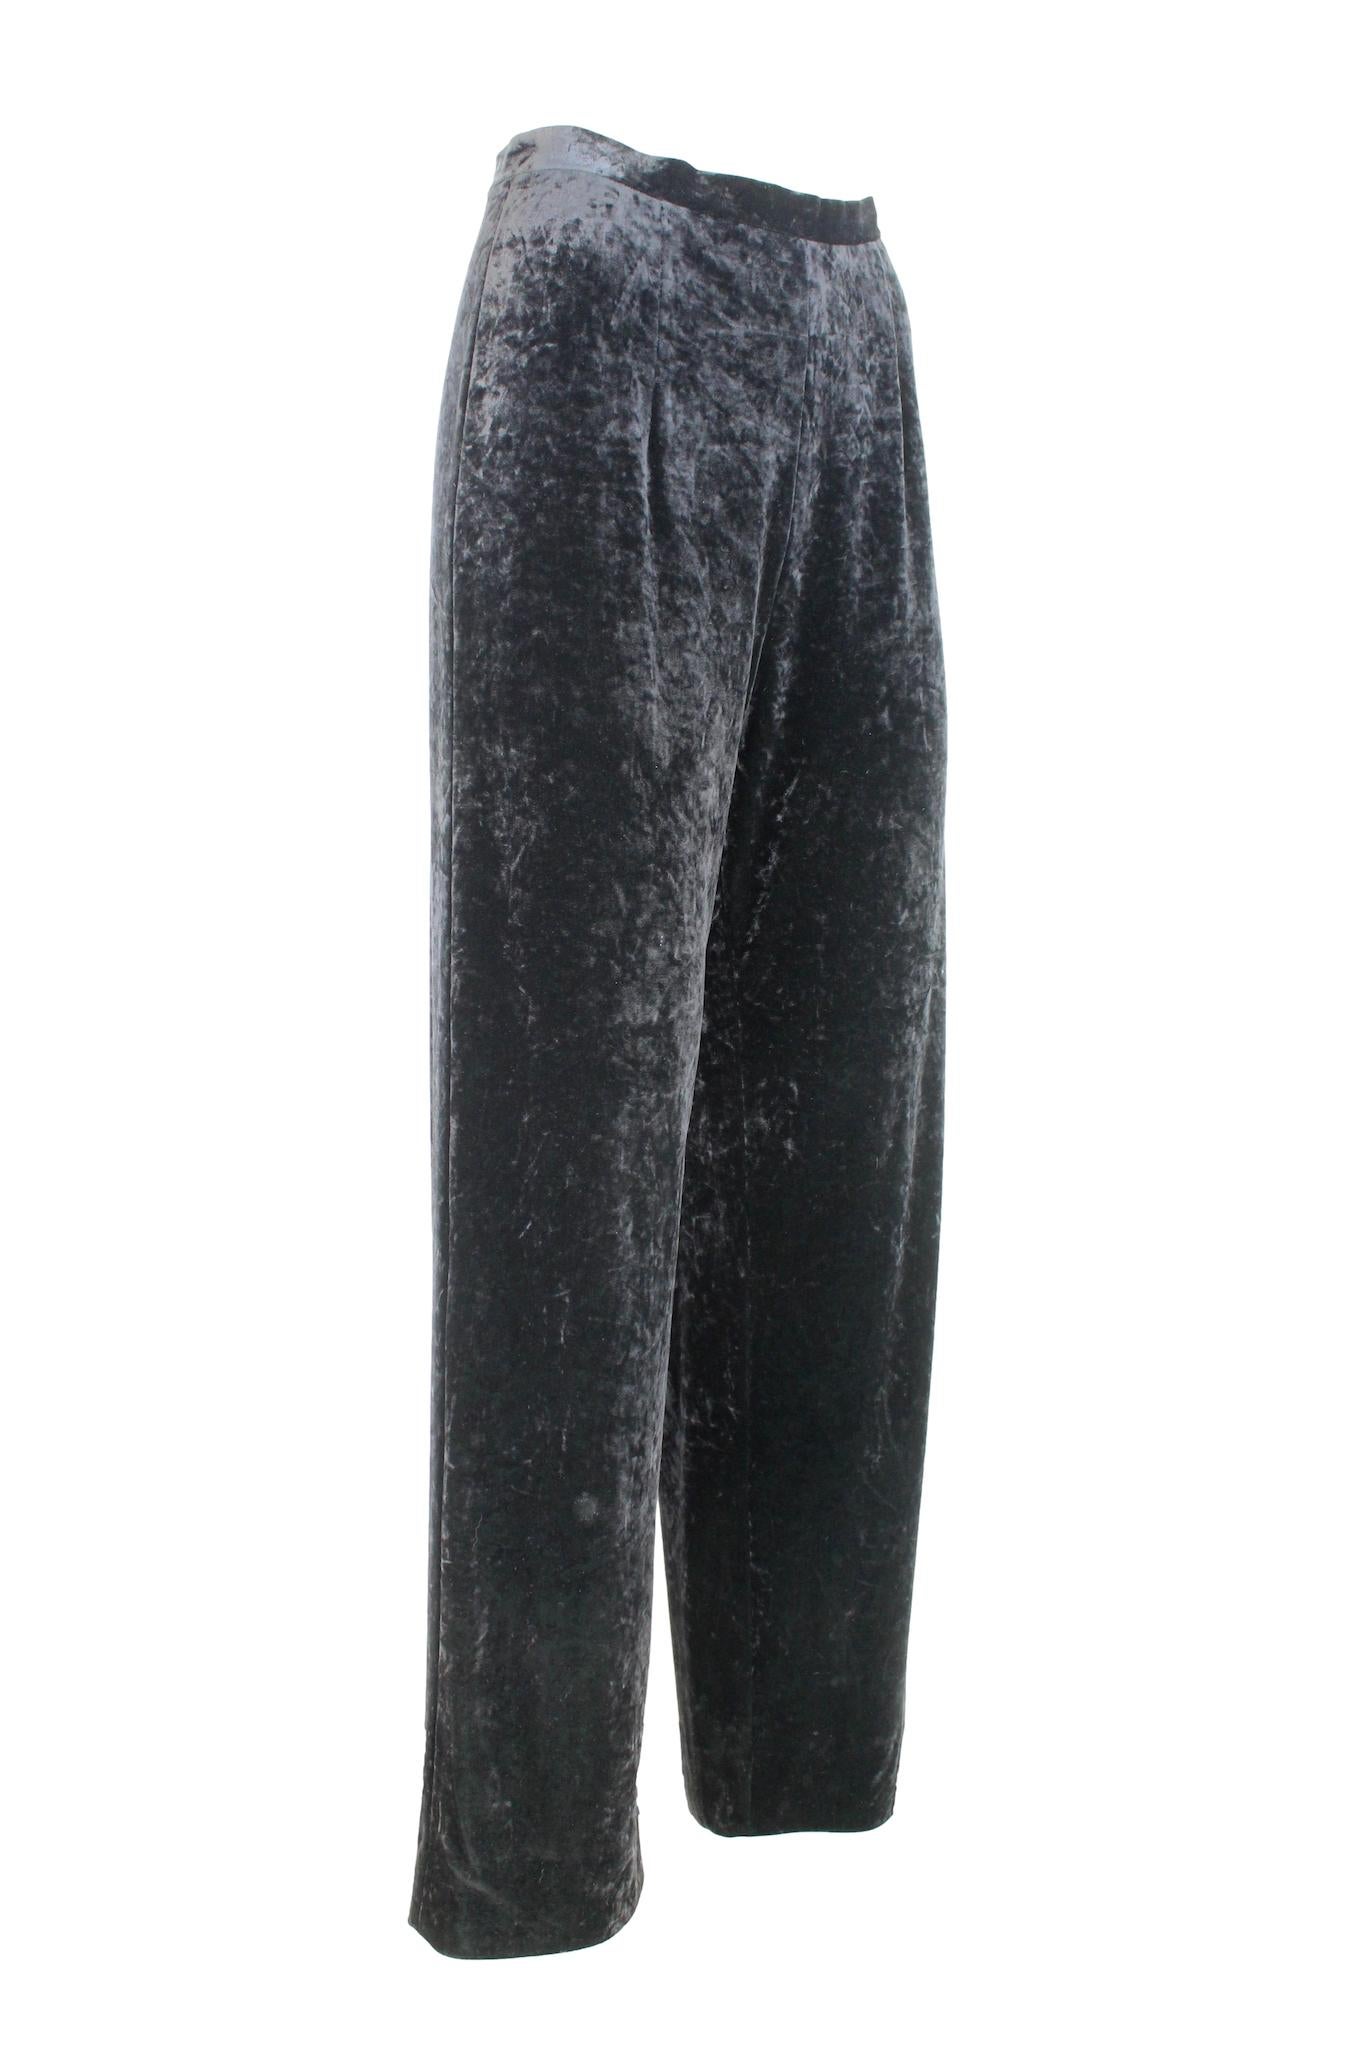 Metradamo Black Velvet Palace Trousers In Excellent Condition For Sale In Brindisi, Bt